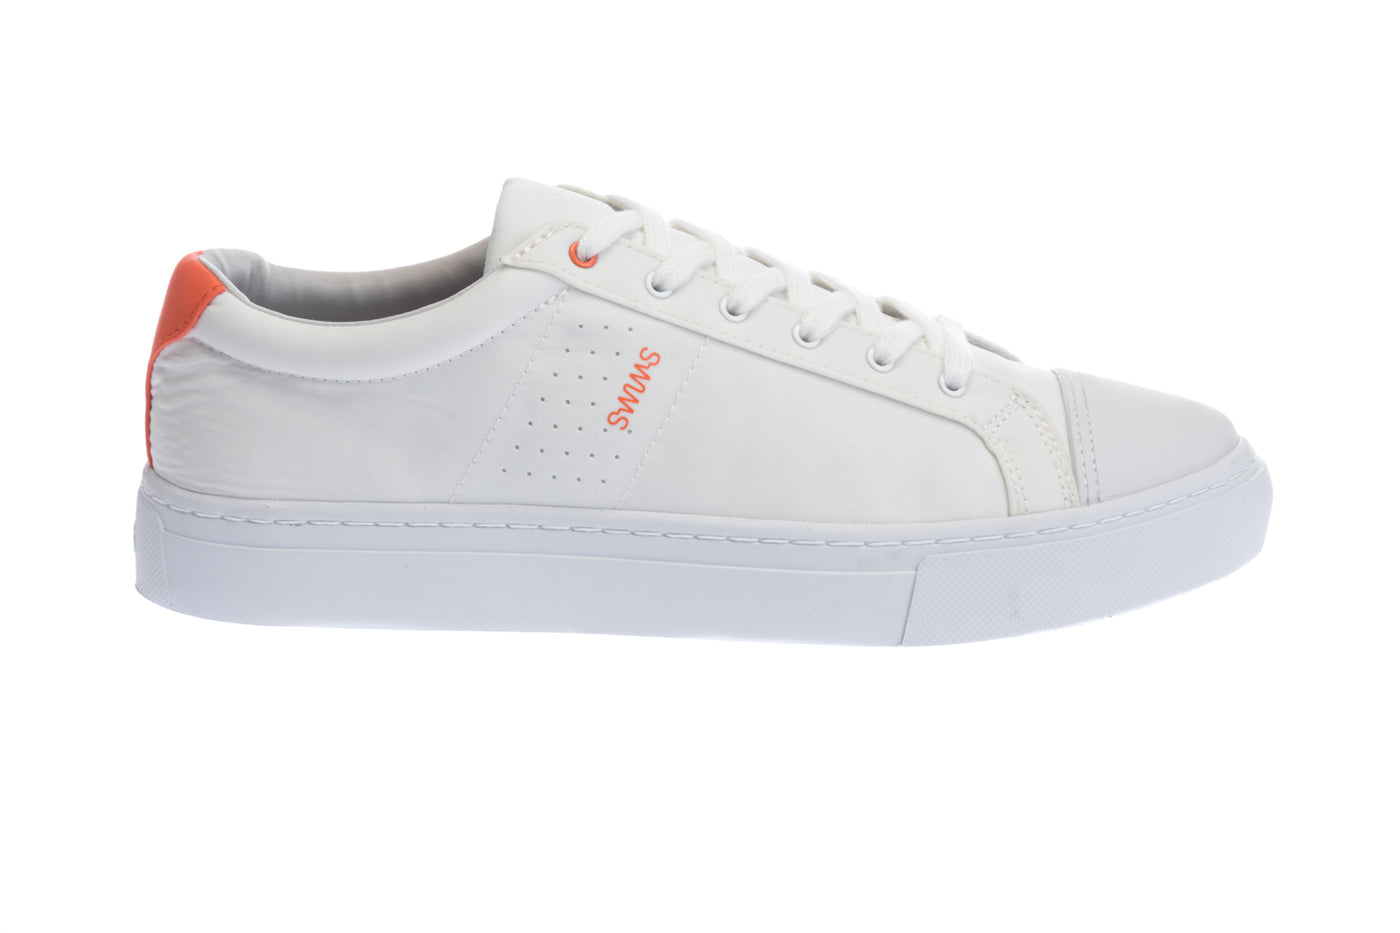 Swims The Legacy Trainer in White